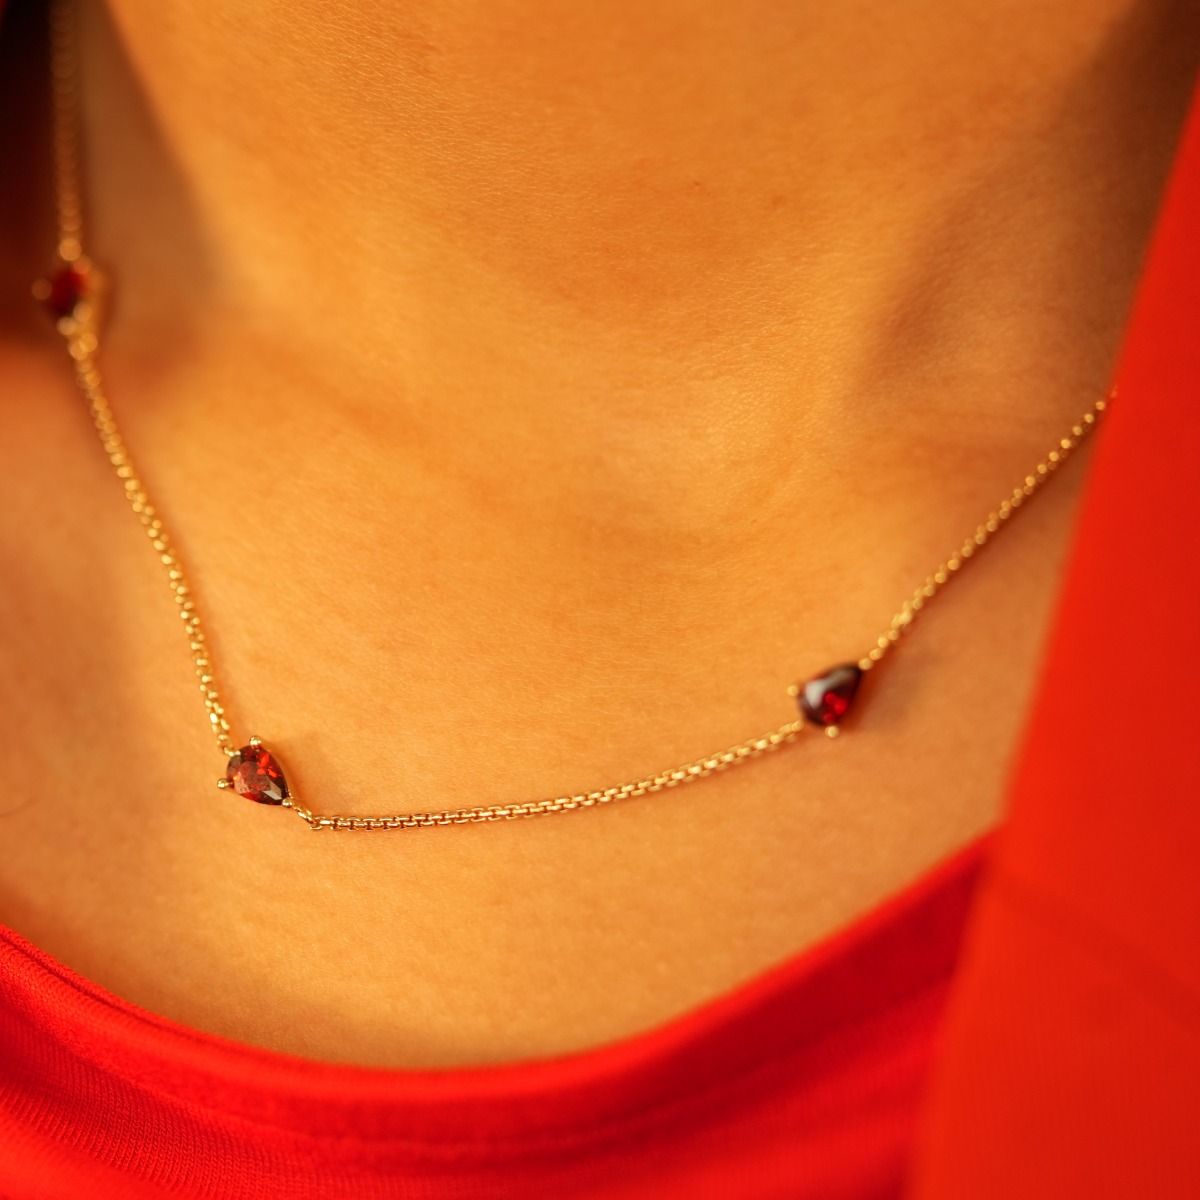 The Dainty Stud and Choker Set provides an understated appeal as it combines a delicate chain choker with vibrant cubic zirconia stones. Therefore, epitomising subtle allure with its effortless use of colour and lightweight characteristics. 